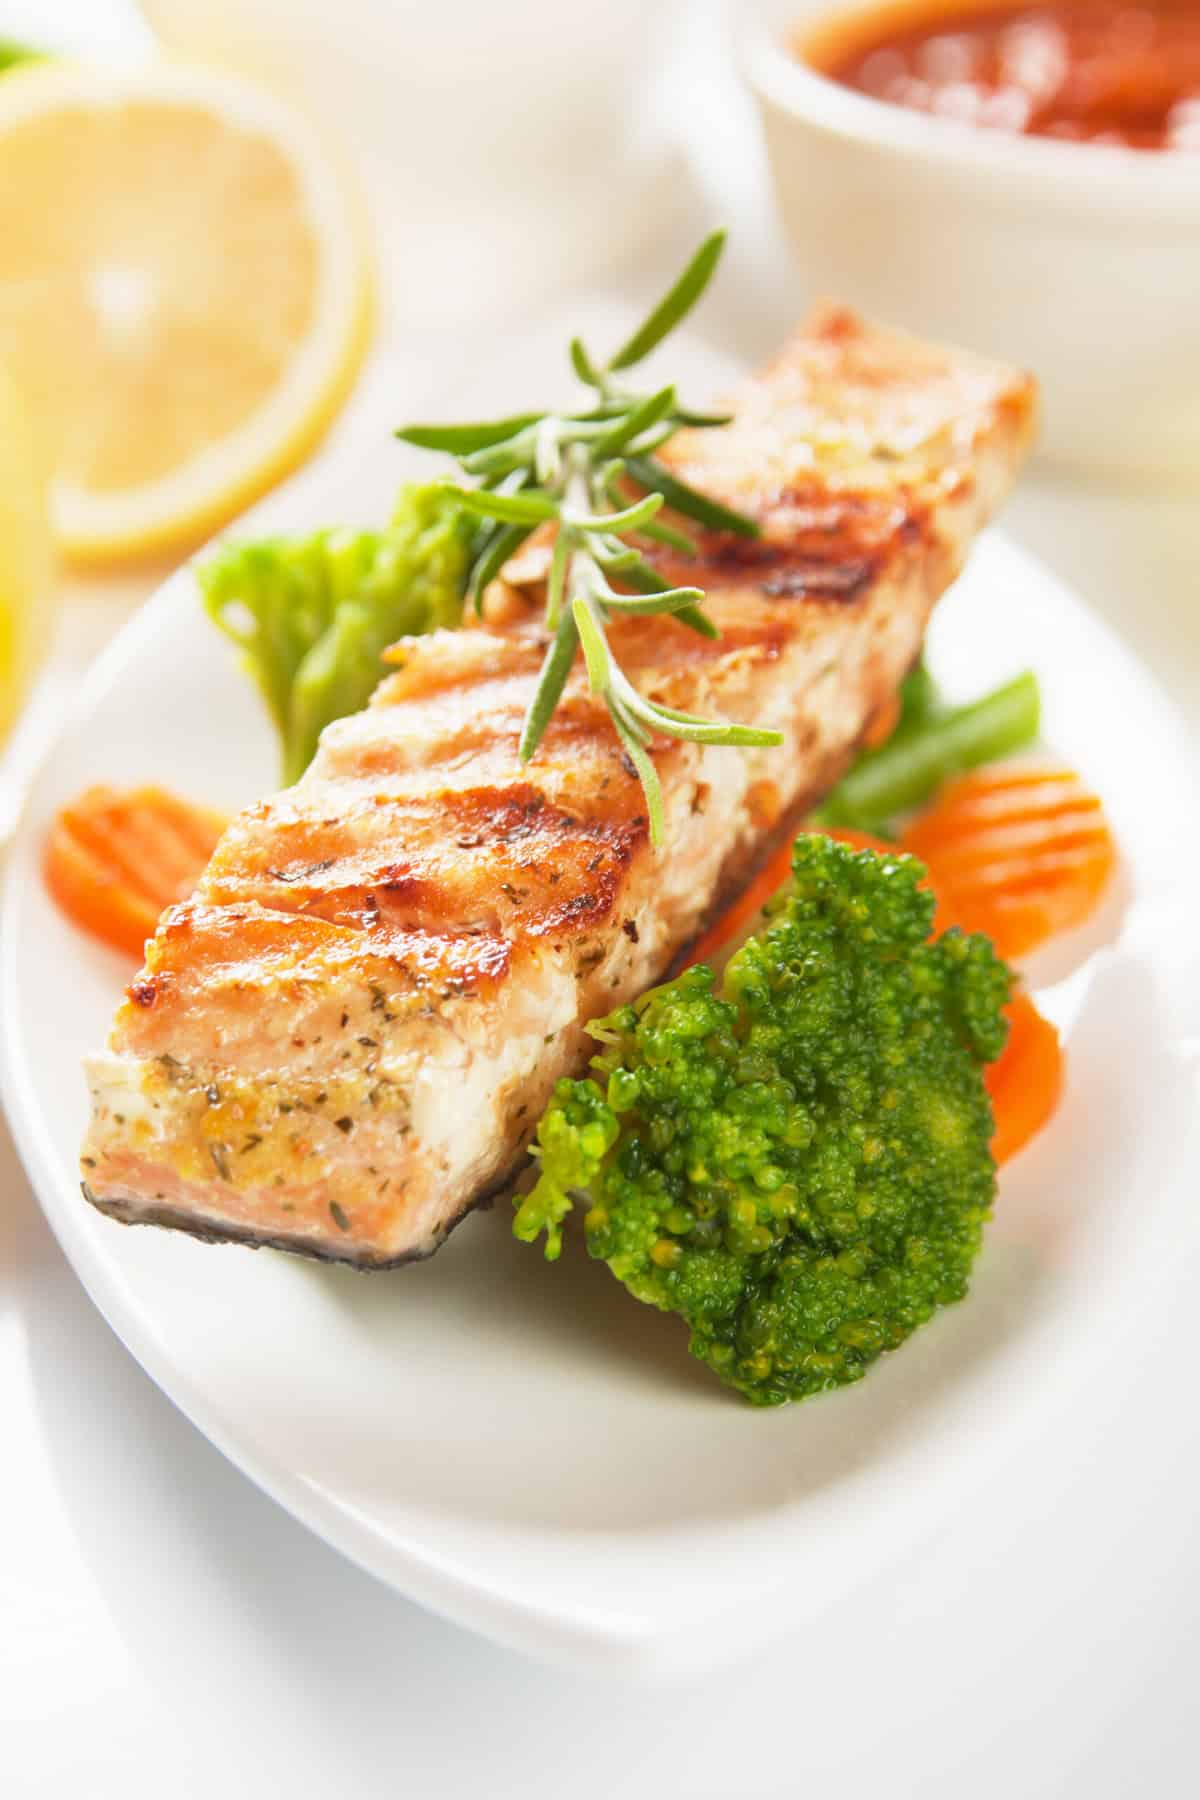 Grilled salmon, with steamed vegetables, served on a white oval plate.